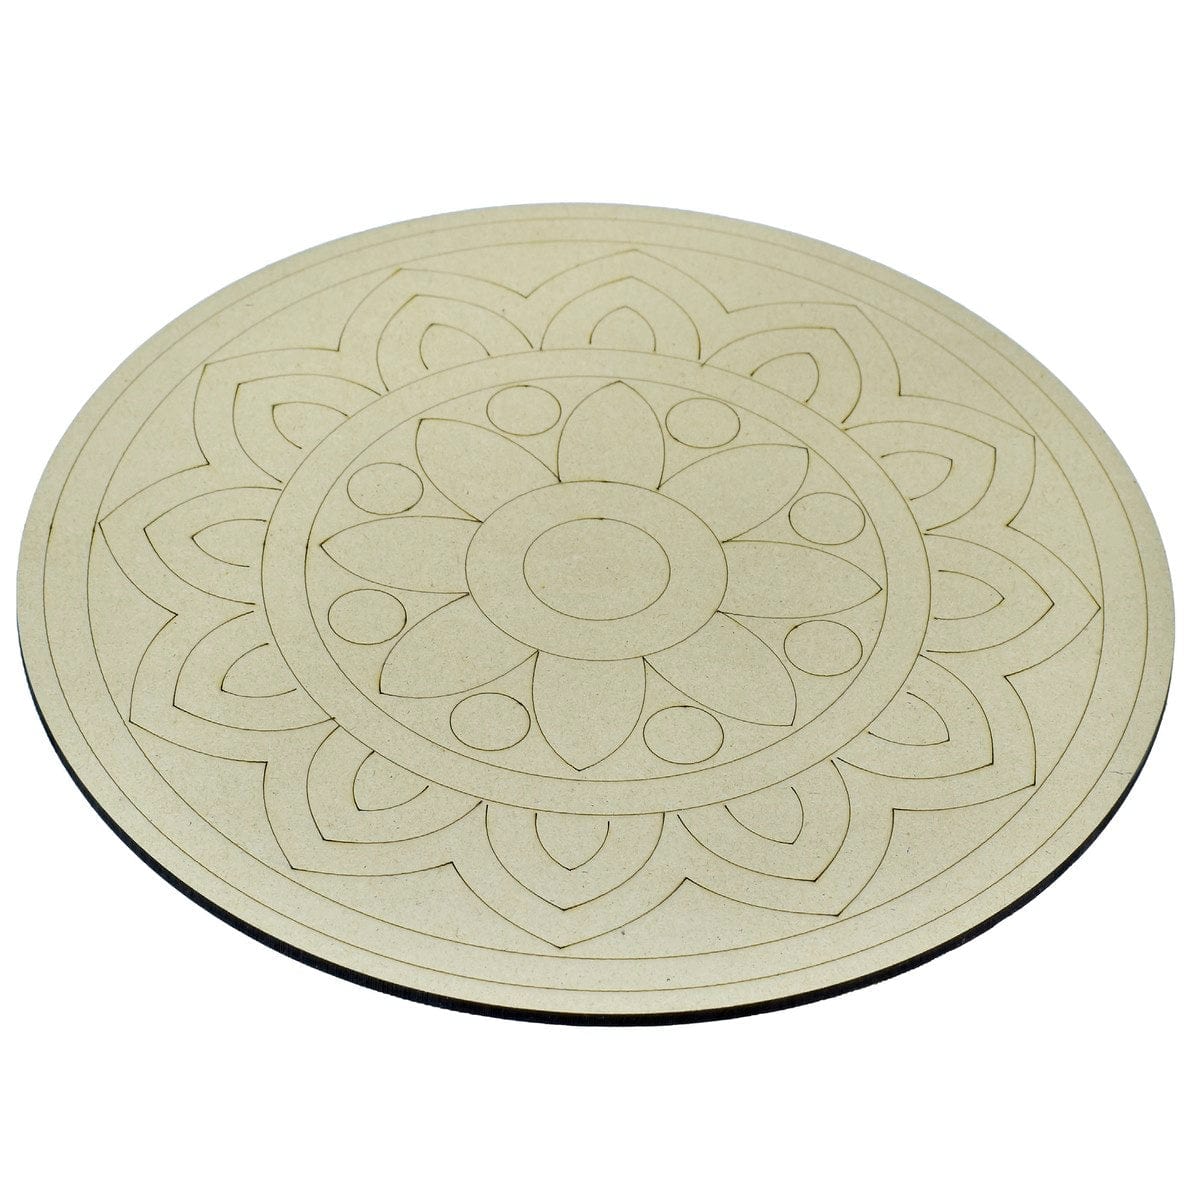 jags-mumbai MDF Pre-marked MDF Flower Rangoli Shapes Cutout for Pichwai Painting and DIY Crafts